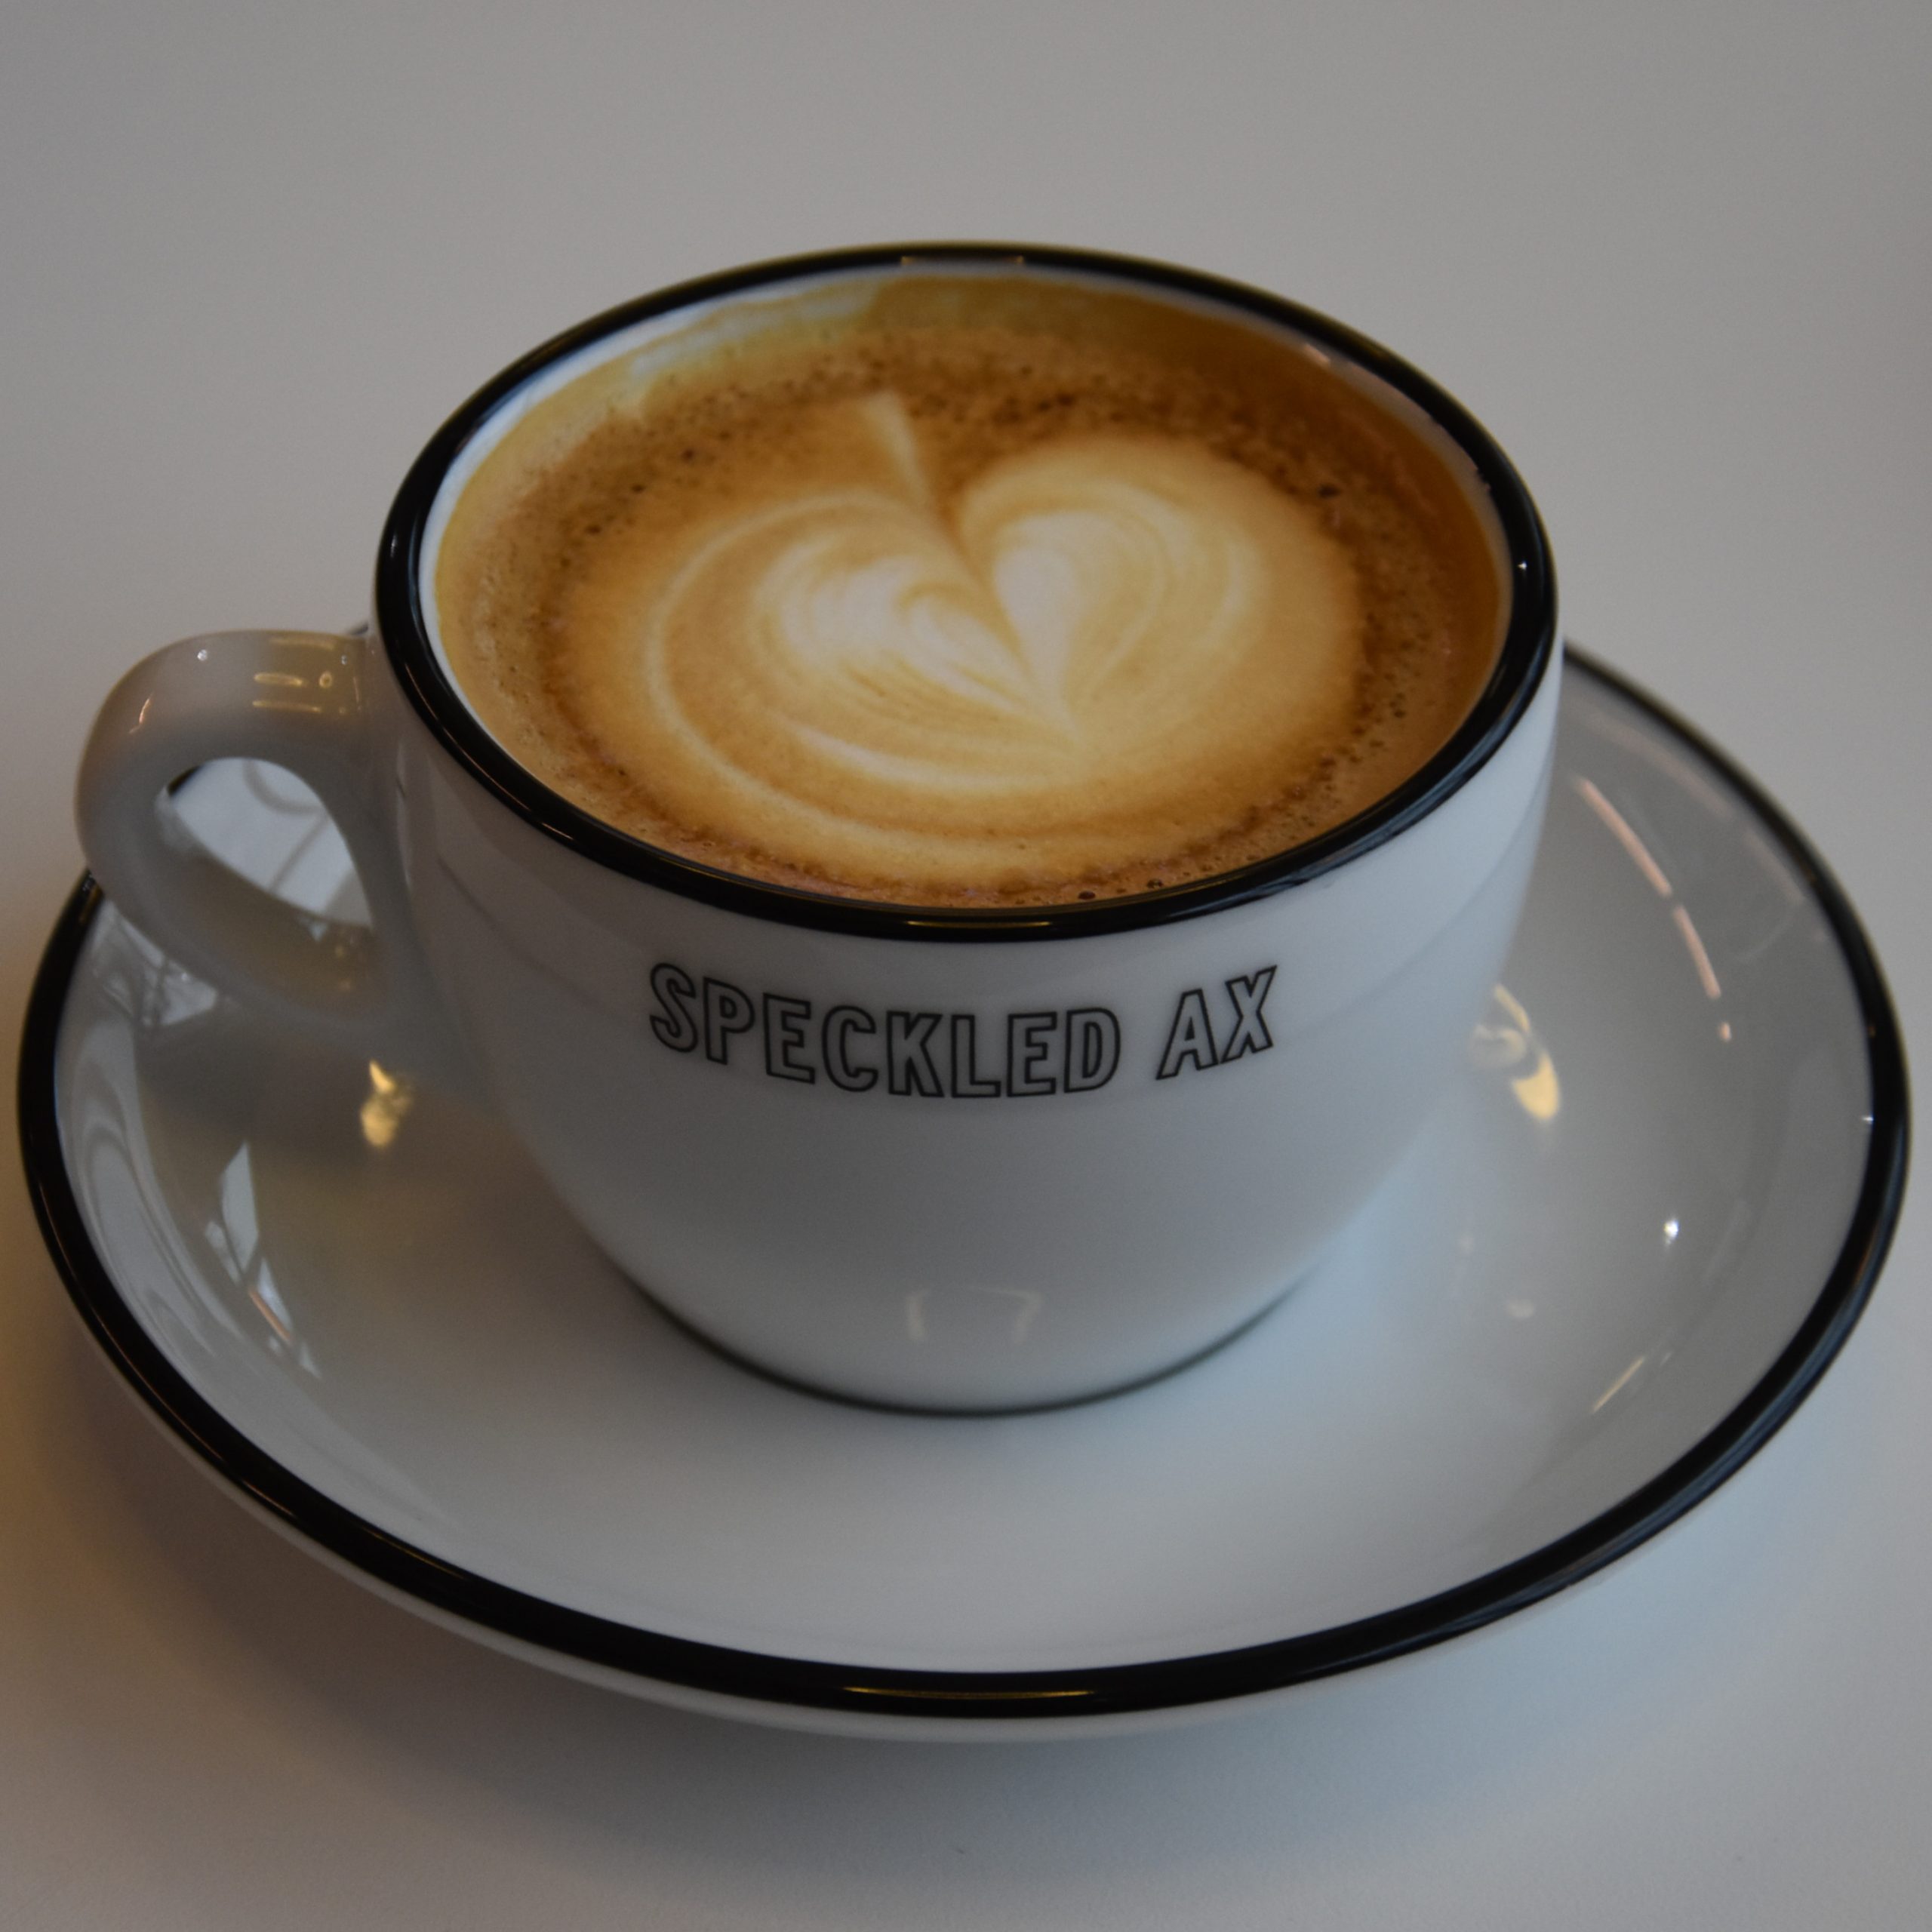 A lovely cappuccino, made with the Honduras El Cedro, a honey processed coffee, served in a classic white cup at Speckled Ax, Thames Street in Portland, Main.